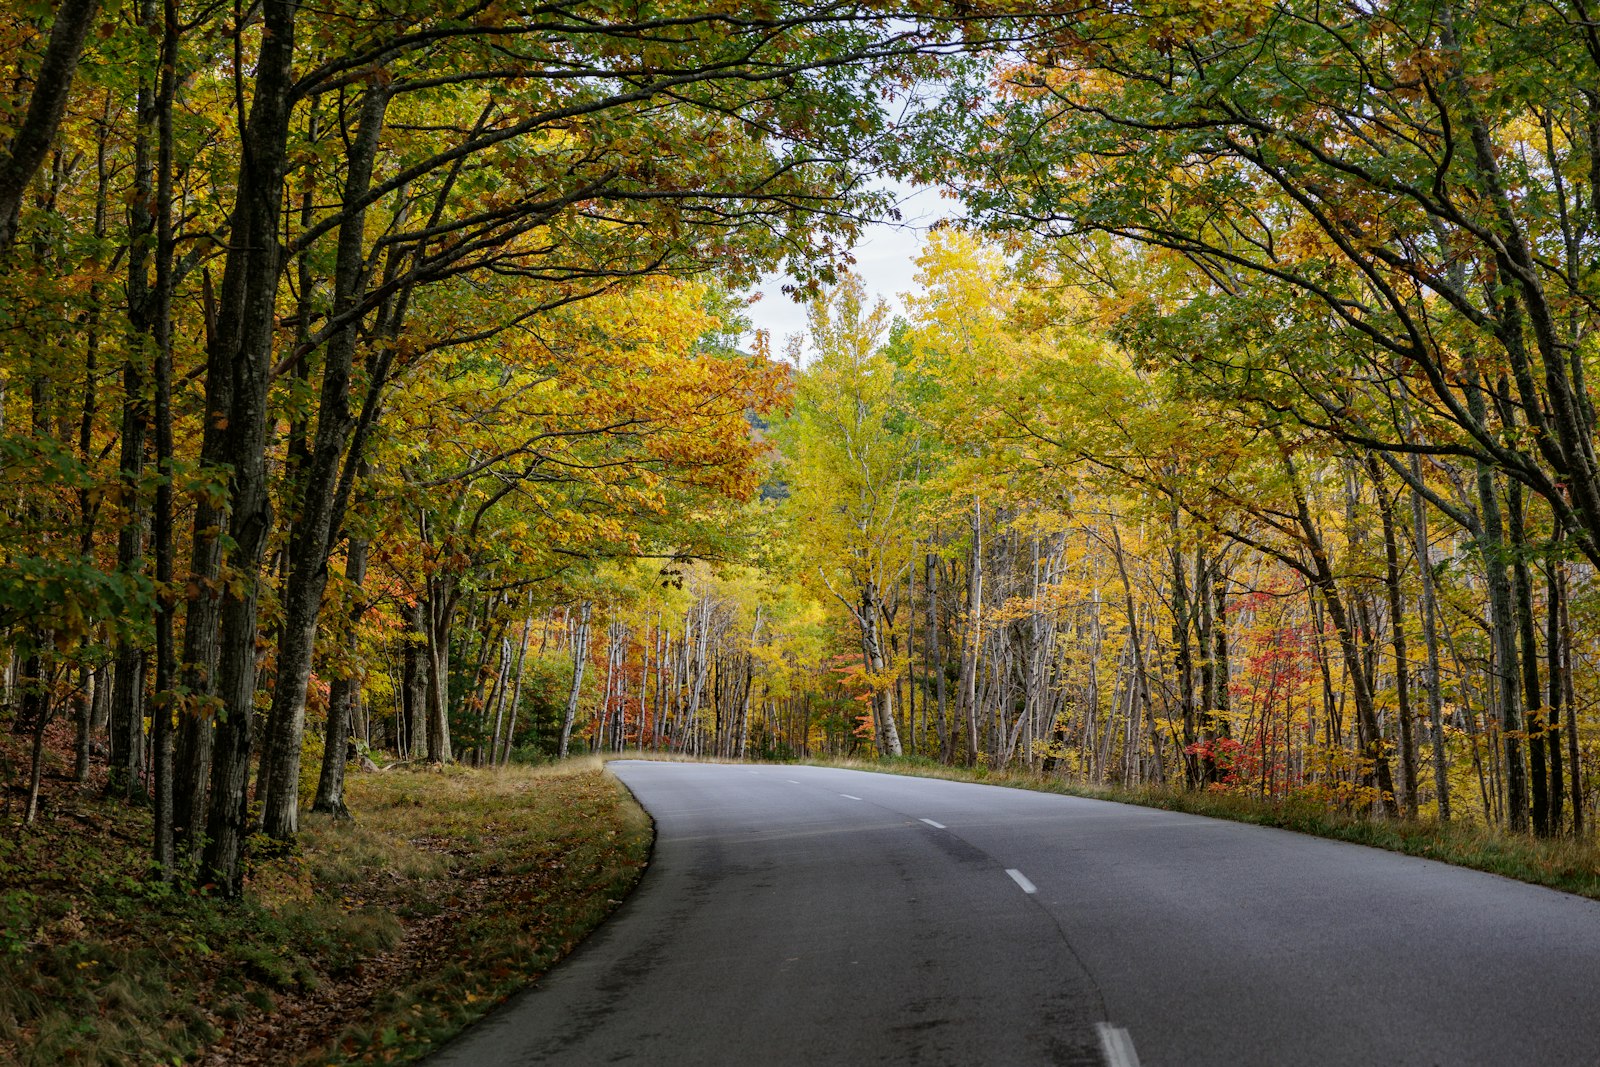 A paved 2-lane road stretches around a bend in the distance. The road is lined with trees with colorful autumn foliage